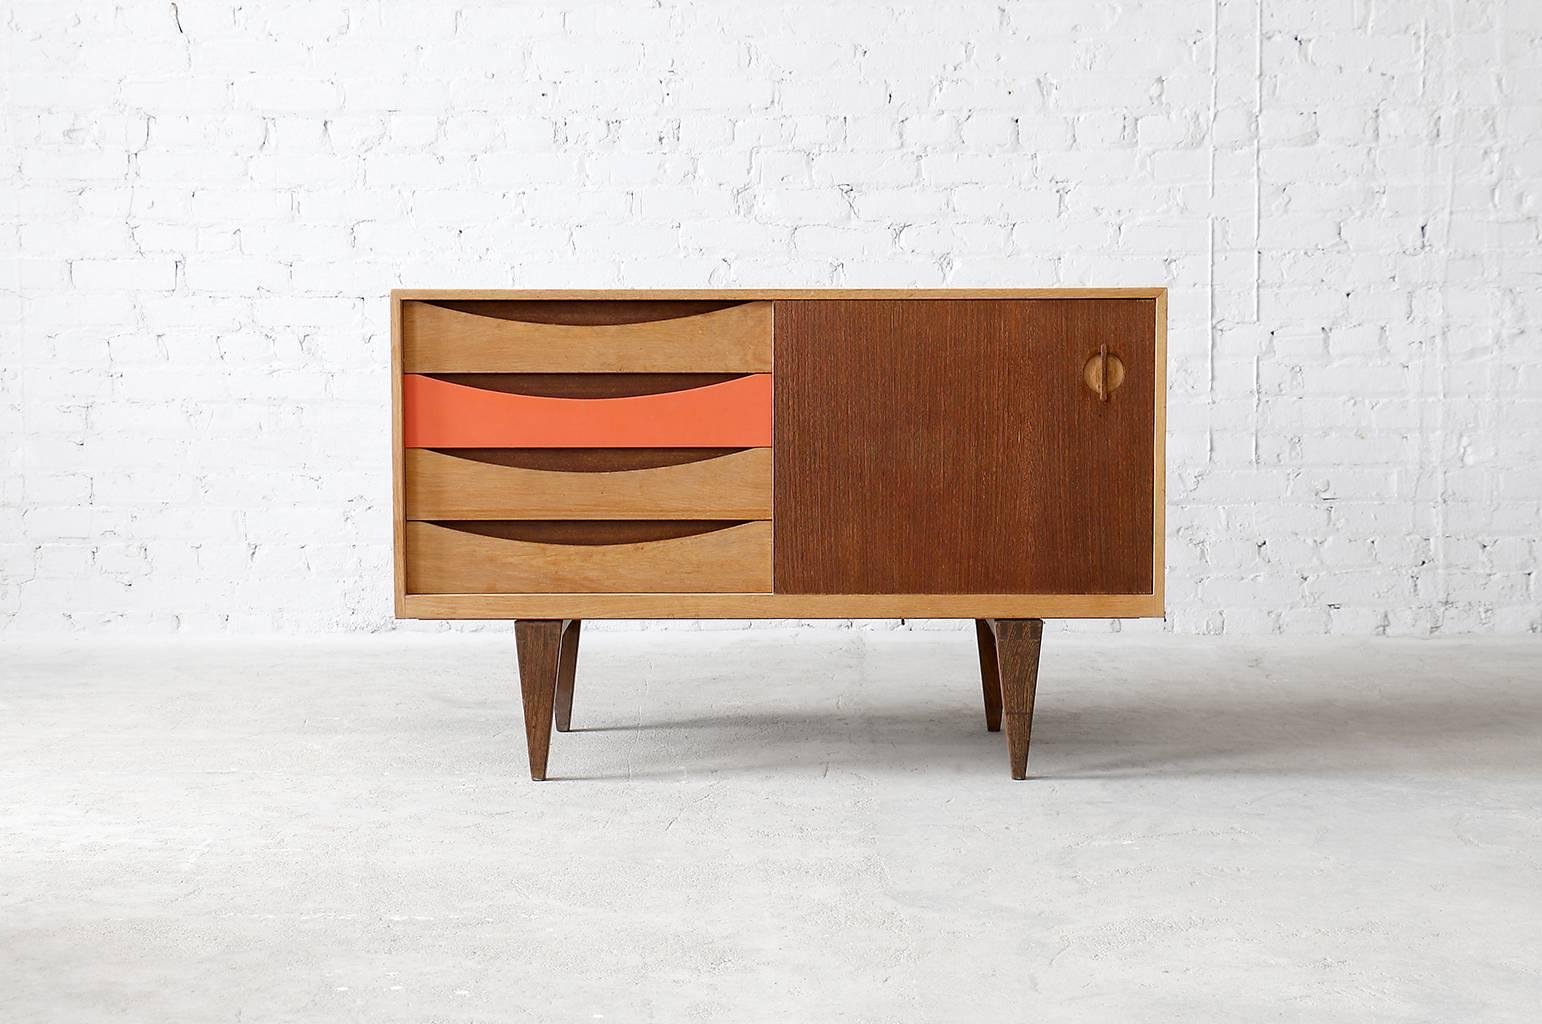 Unique and rarely seen oak and wenge sideboard designed by Erik Wørts for Kjellerup Møbelfabrik. This sideboard features solid wenge legs as well as salmon colored painted drawer and interior.

- Unique oak and wenge construction
- Excellent